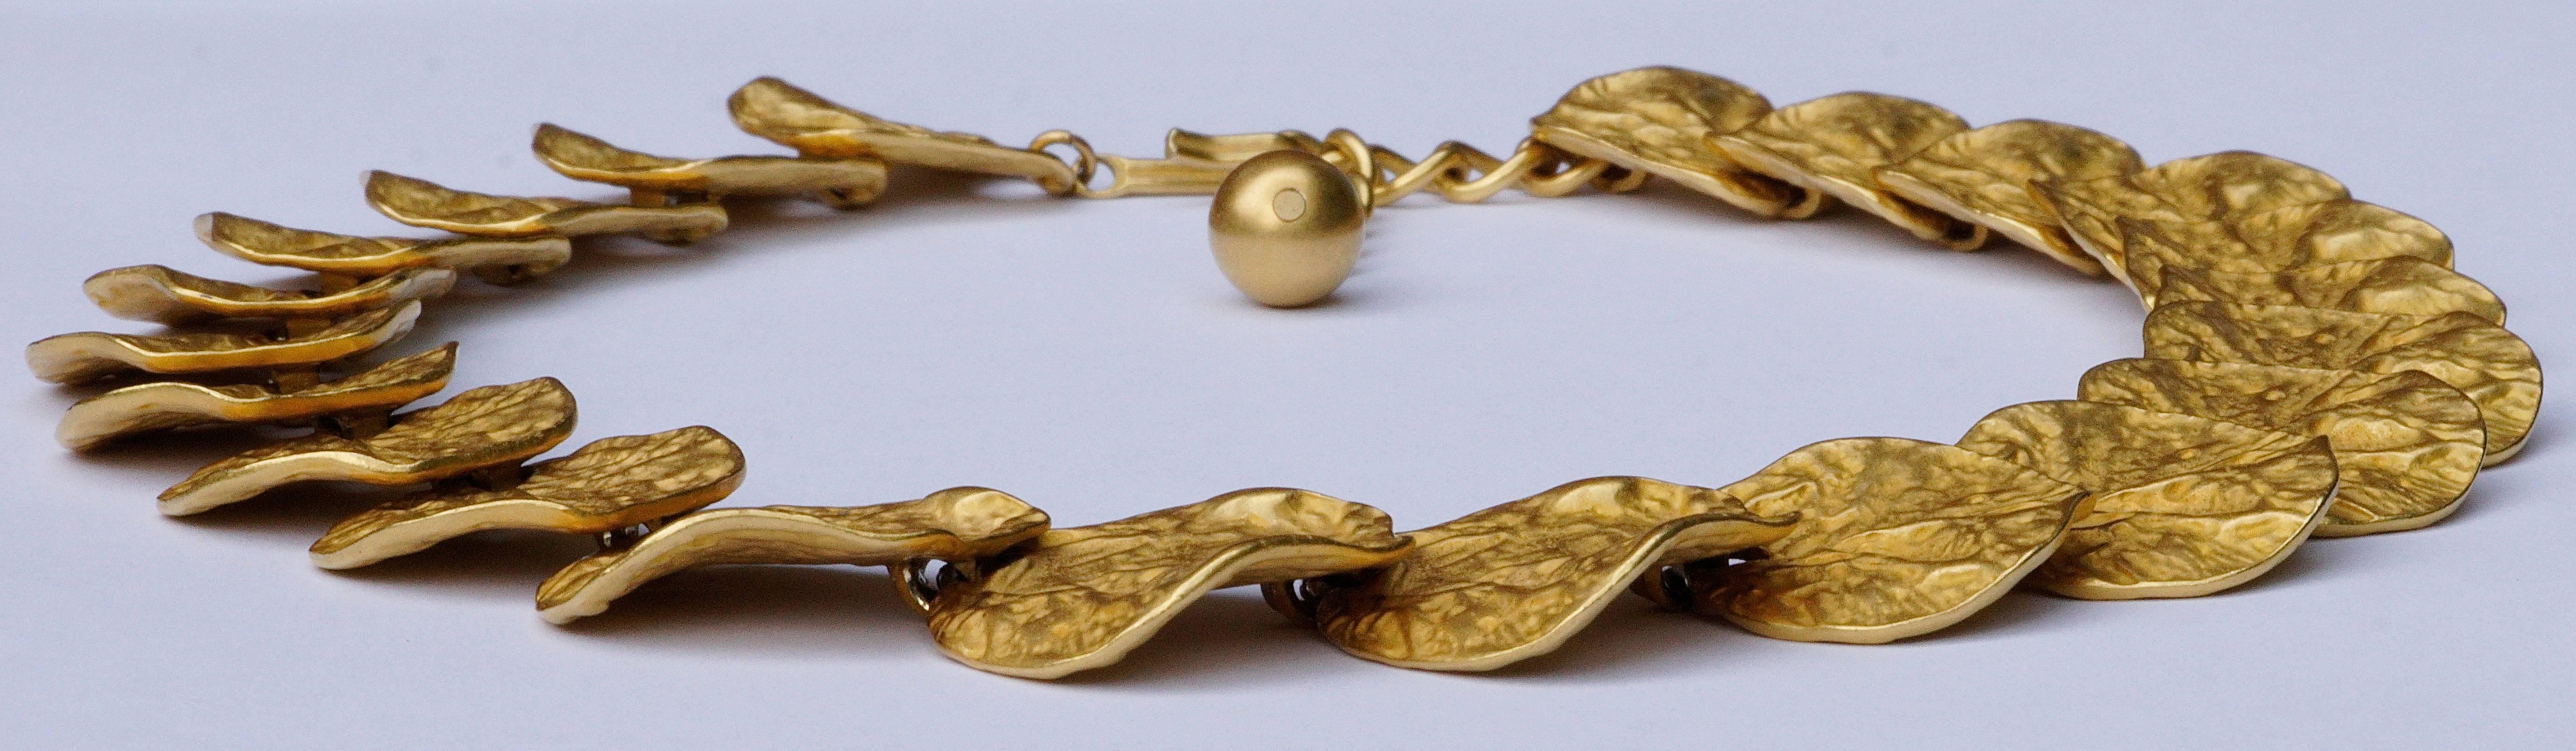 Quality 1990s gold plated necklace, featuring gingko leaves, by Kenneth Jay Lane. It is stamped KJL© China.
Measuring length 46cm, 18.11 inches, including the extension, and the leaves are approx. 2.2cm by 2.2cm, .86 inch by .86 inch.

This is a